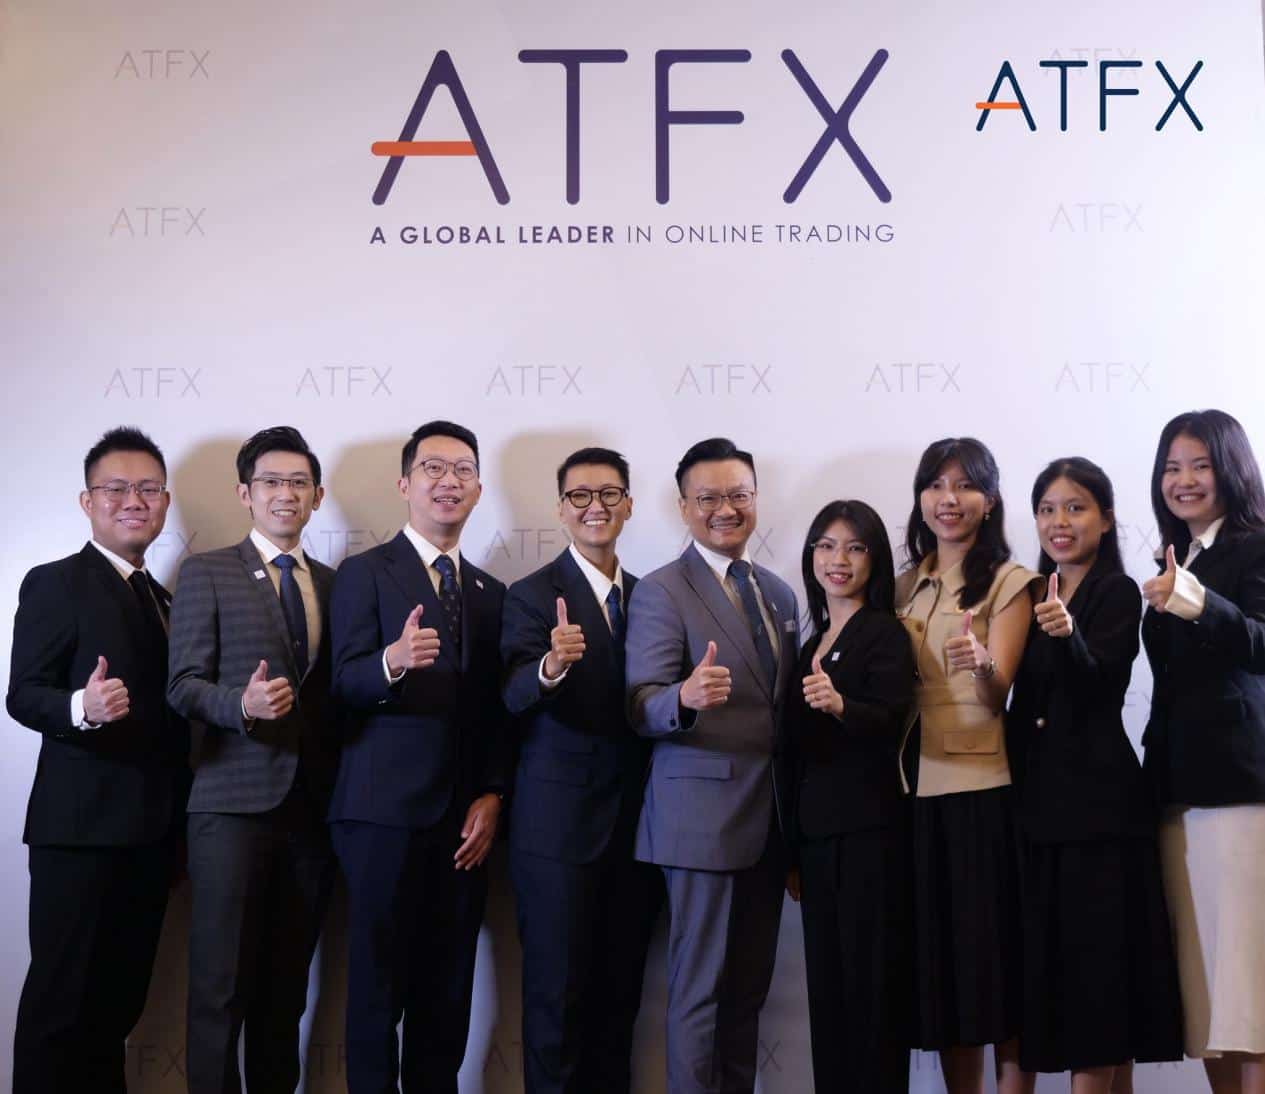 BOSSPlan to open a new chapter,ATFXOpening a New Chapter in the Education Investment Plan: Entering Vietnam701 / author:atfx2019 / PostsID:1726756